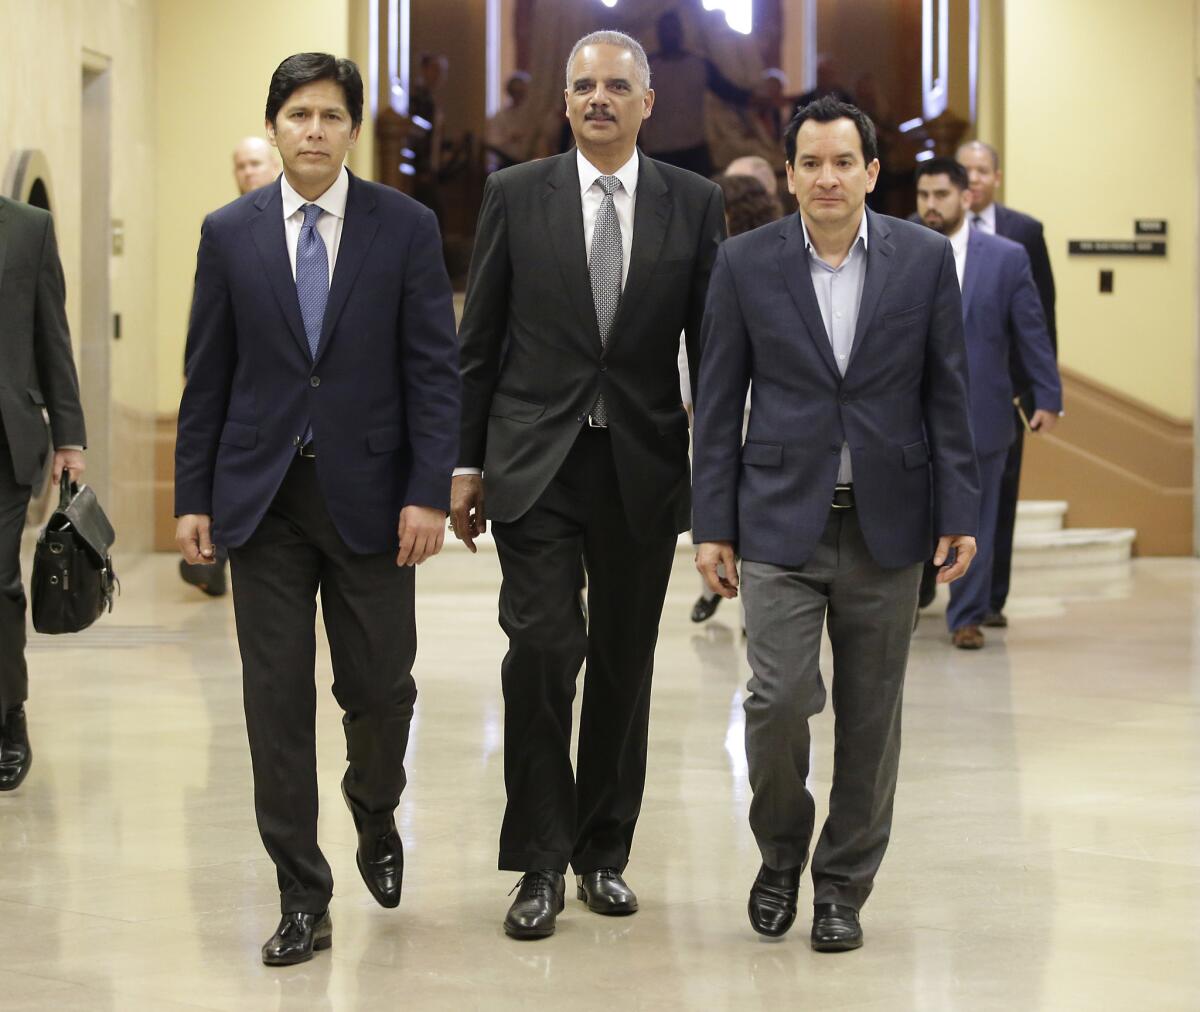 Former U.S. Atty. Gen. Eric Holder, center, flanked by California Senate President Pro Tem Kevin de León (D-Los Angeles), left, and Assembly Speaker Anthony Rendon (D-Paramount) walks to a meeting with Gov. Jerry Brown on Feb. 7 in Sacramento.